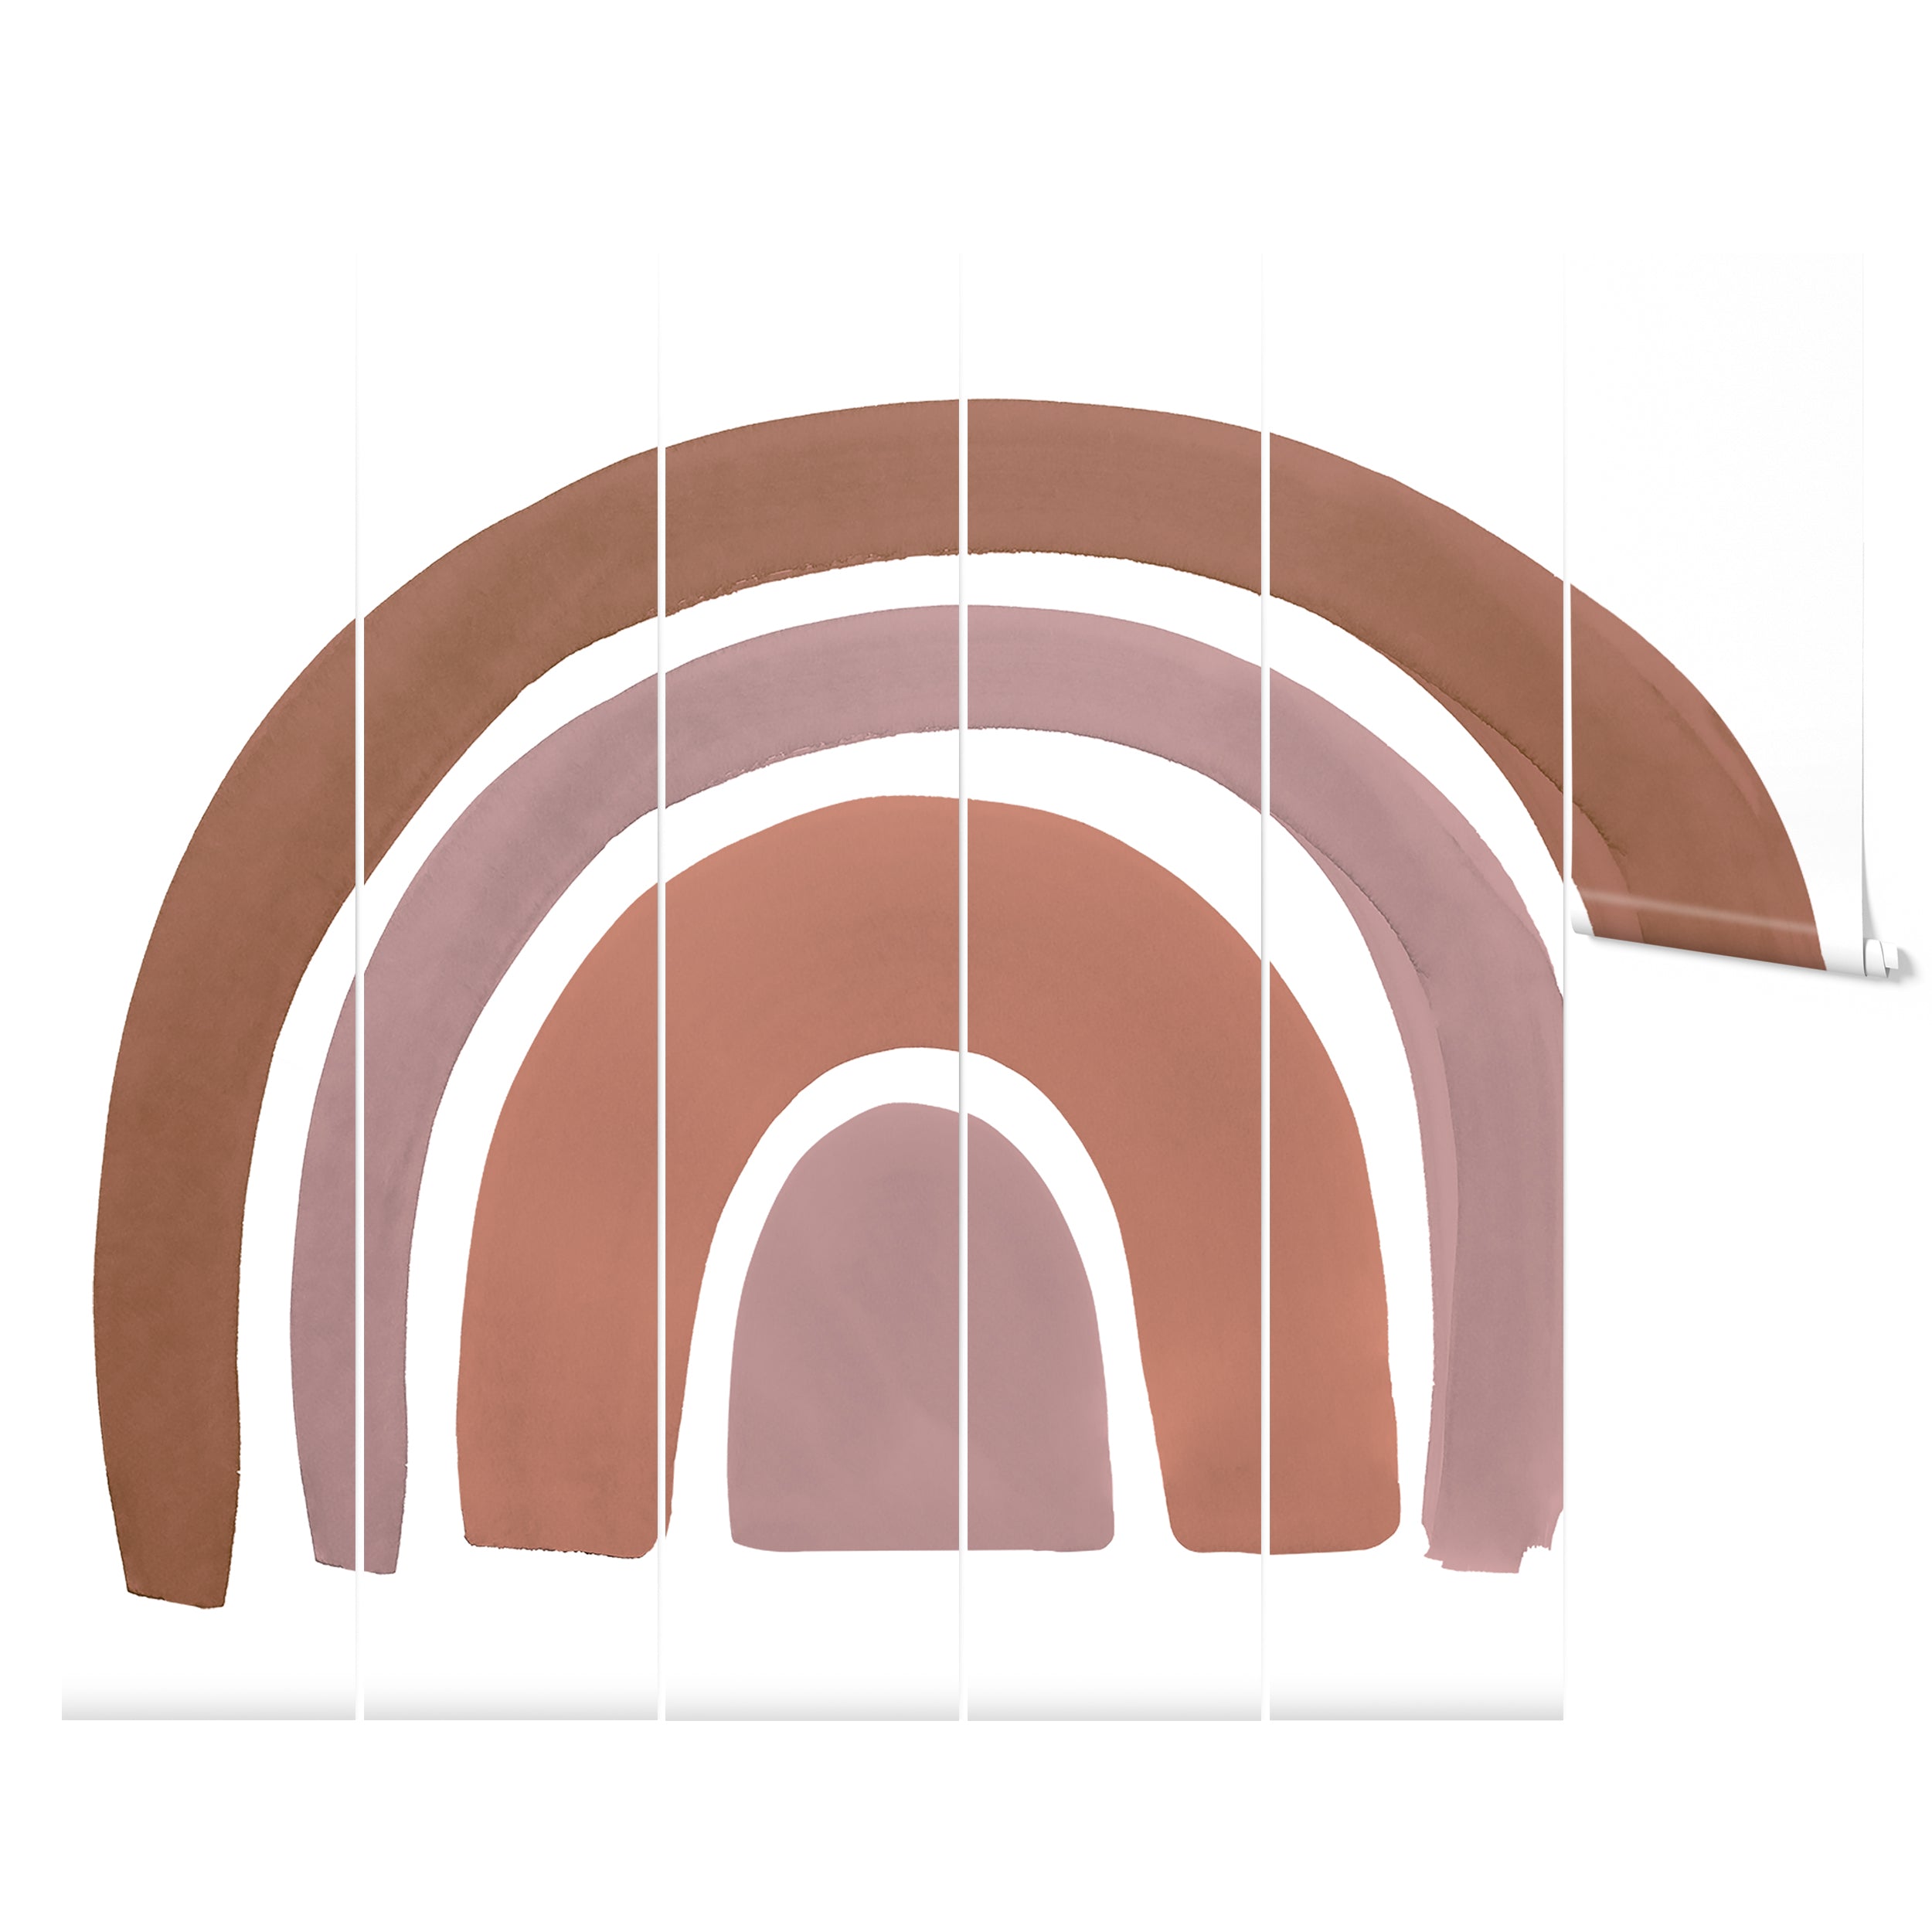 A representation of the Aesthetic Rainbow Wallpaper Mural - Luna spread across six panels. Each panel displays part of the complete design, highlighting the smooth, broad arches in a gradient of brown to pink tones. This image gives a clear view of the mural's scale and color palette, perfect for visualizing the wallpaper in a larger space.